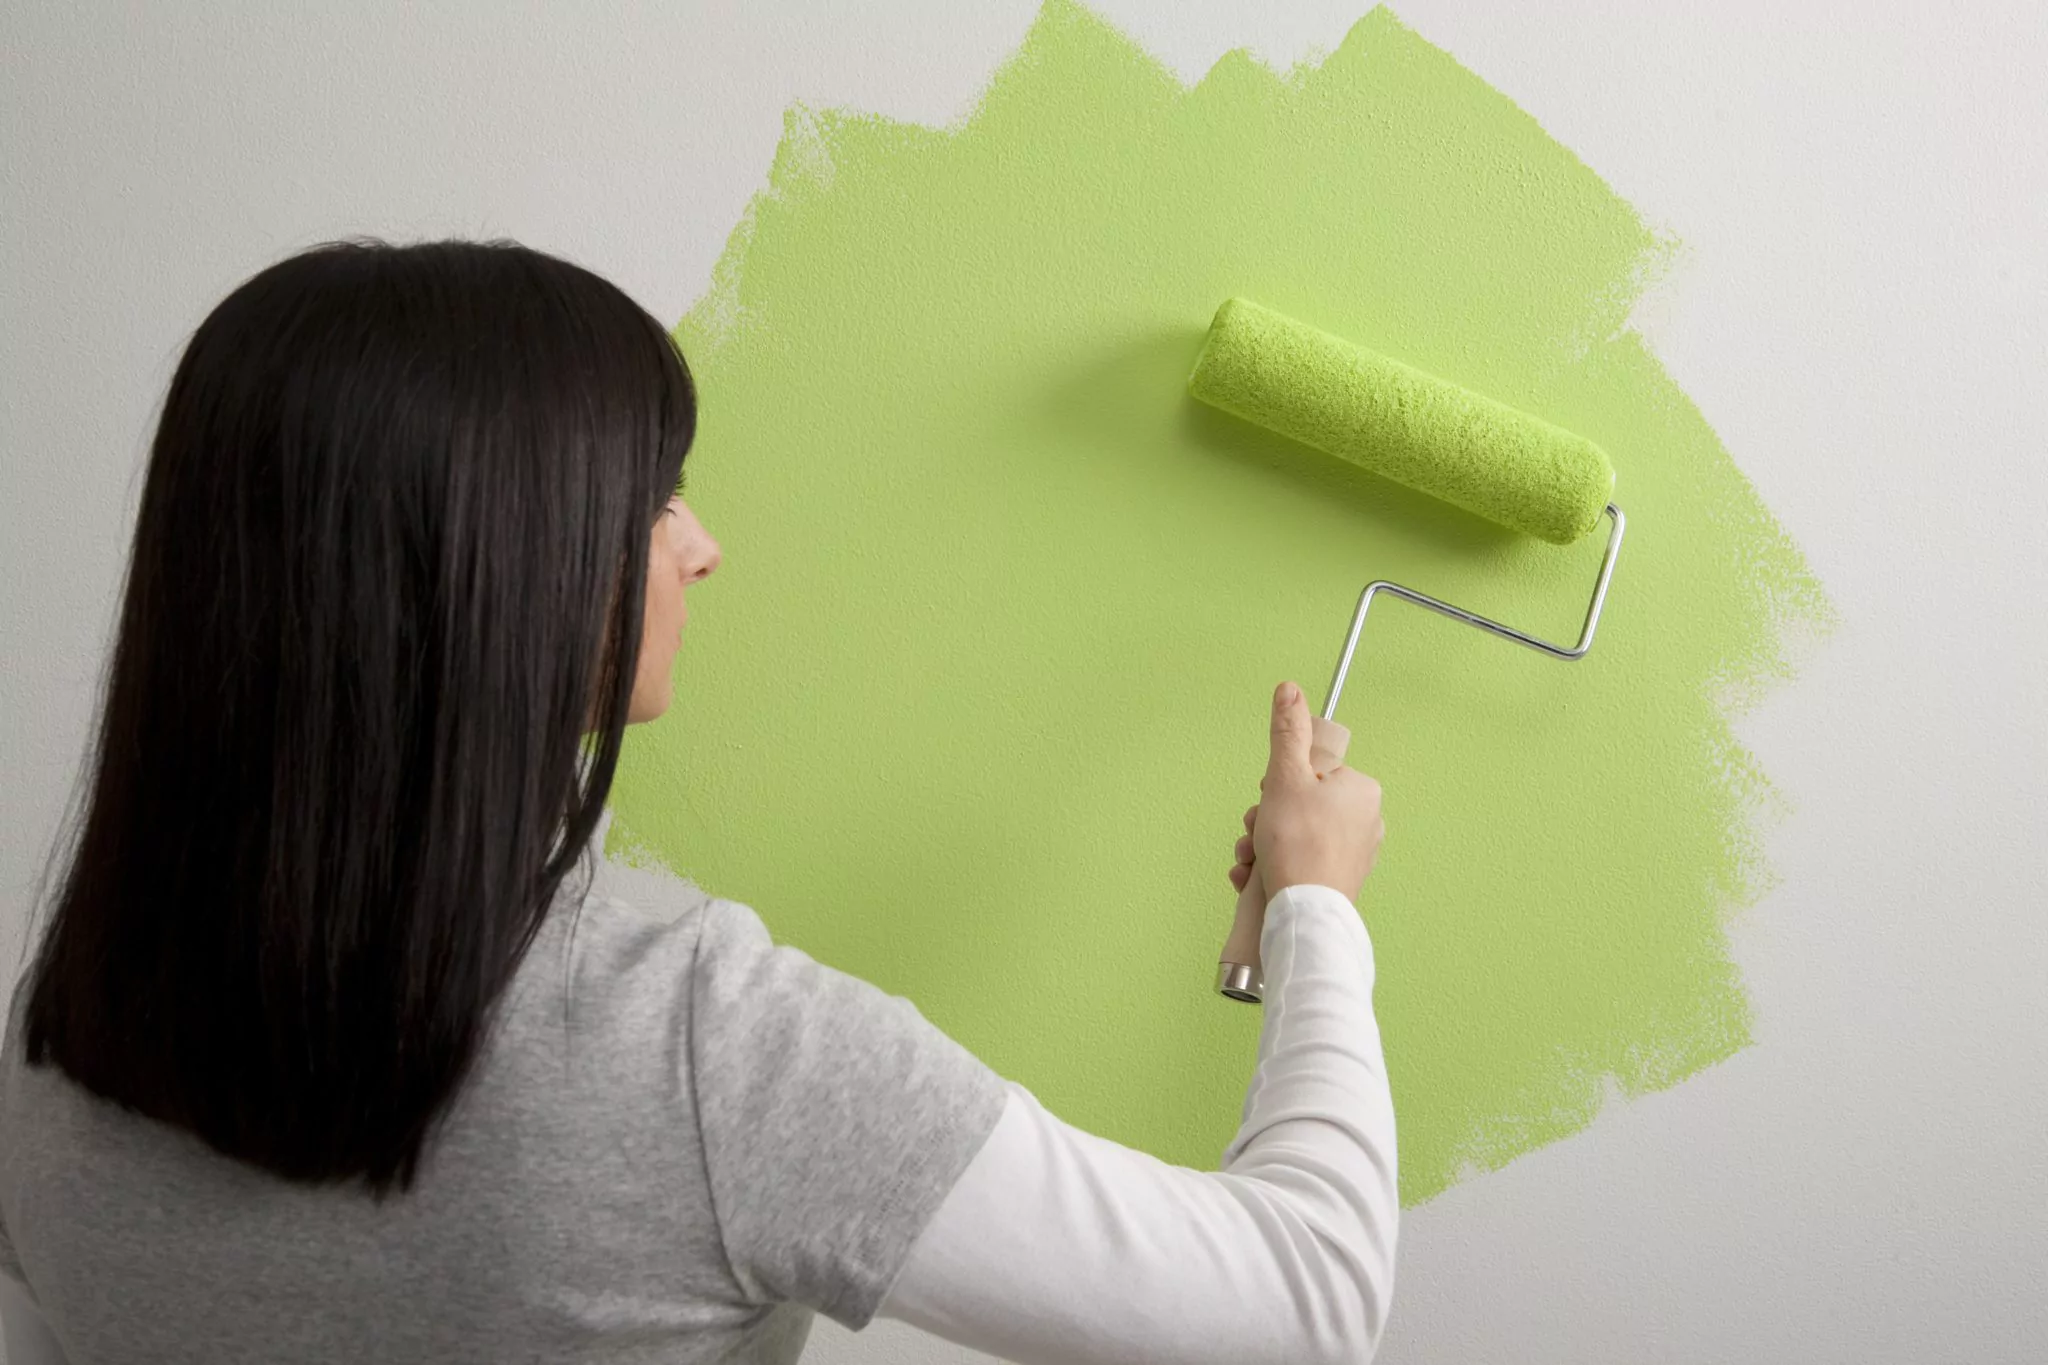 Painting is the ultimate cheap wall covering option